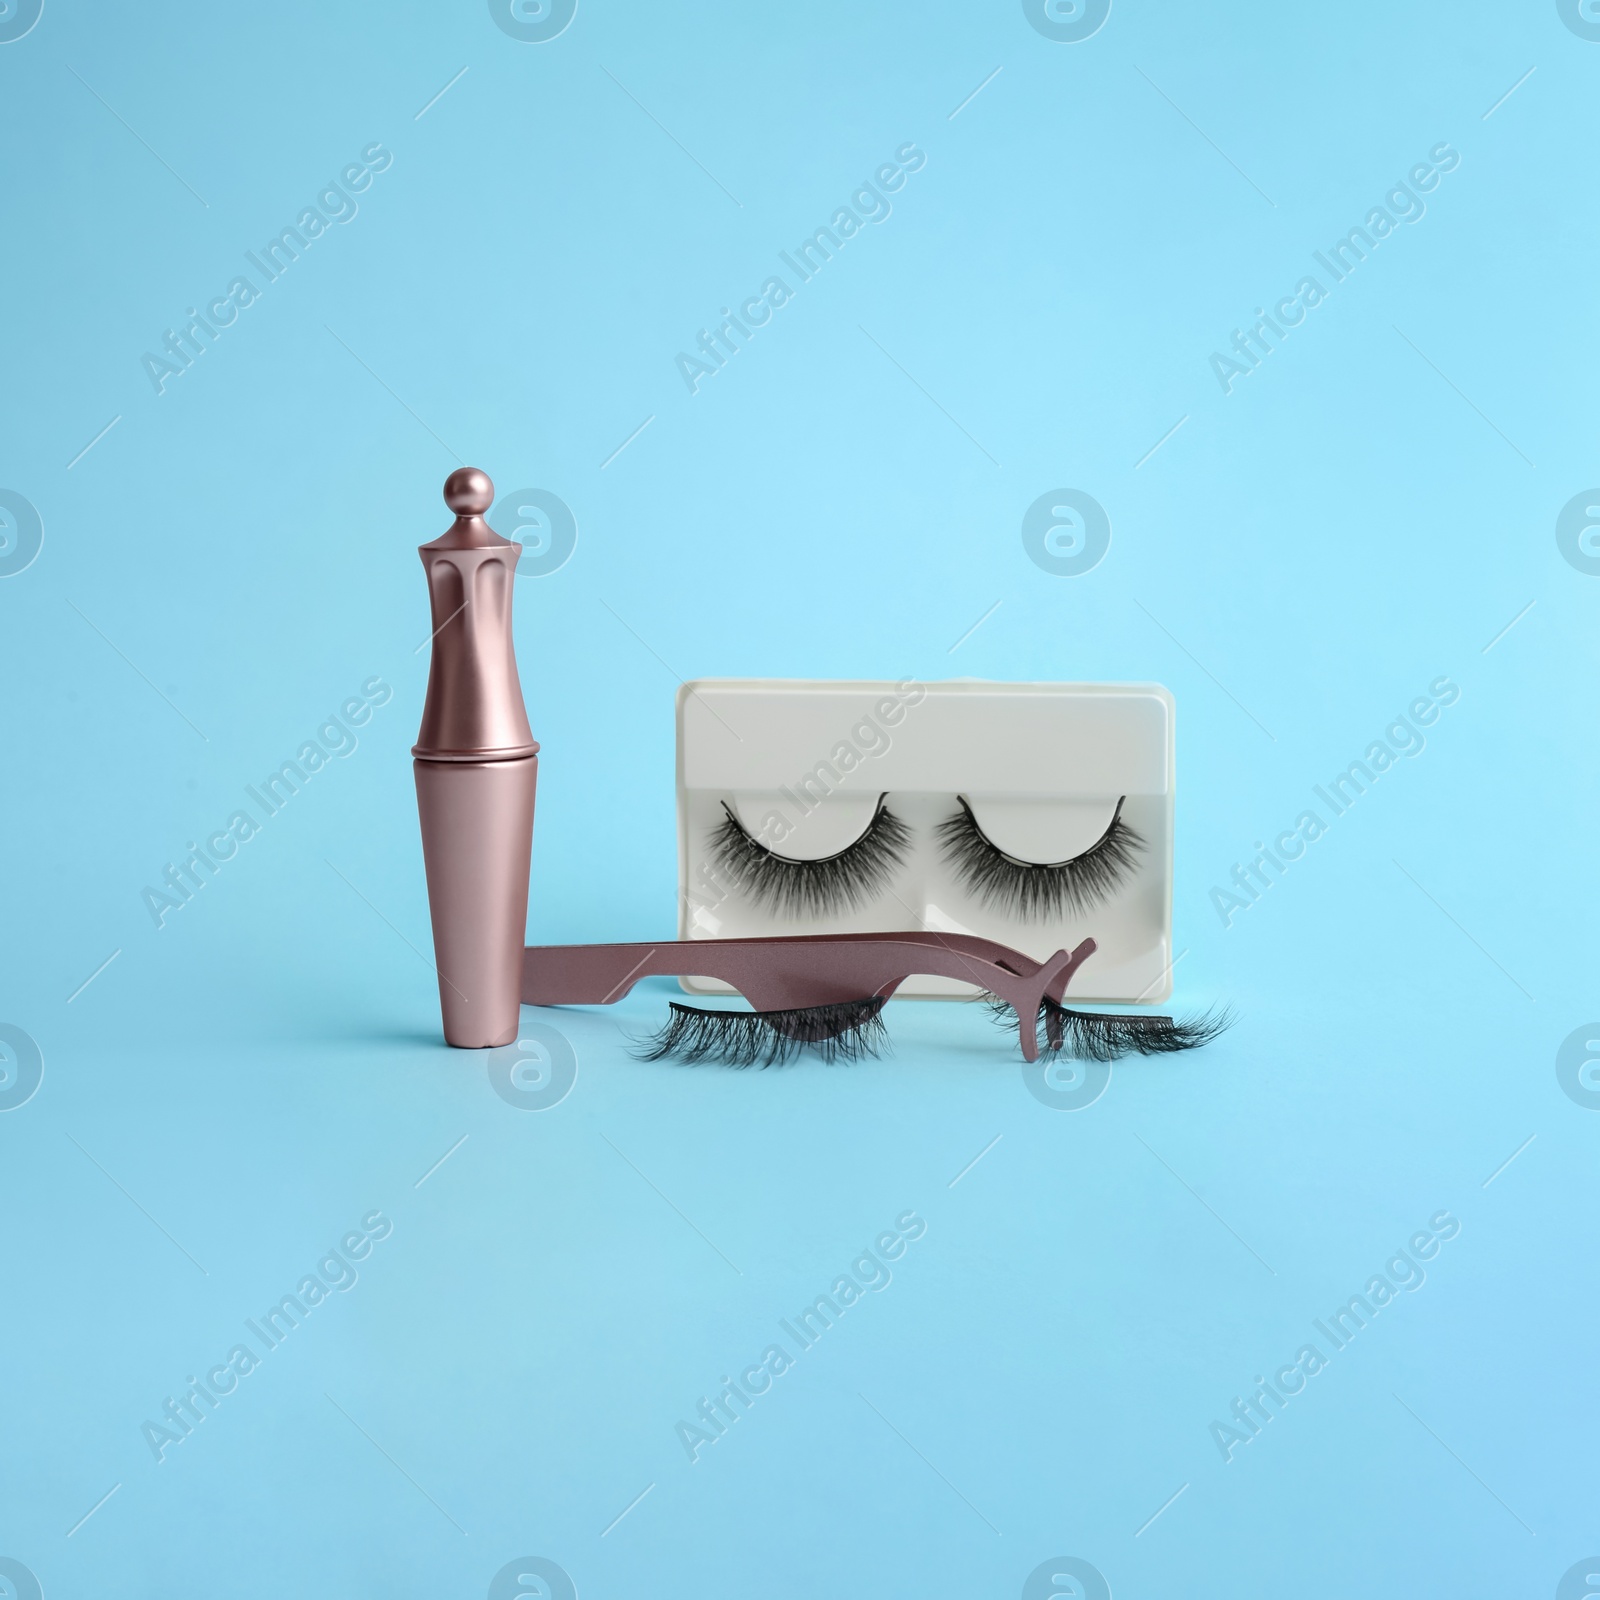 Photo of Magnetic eyelashes and accessories on light blue background